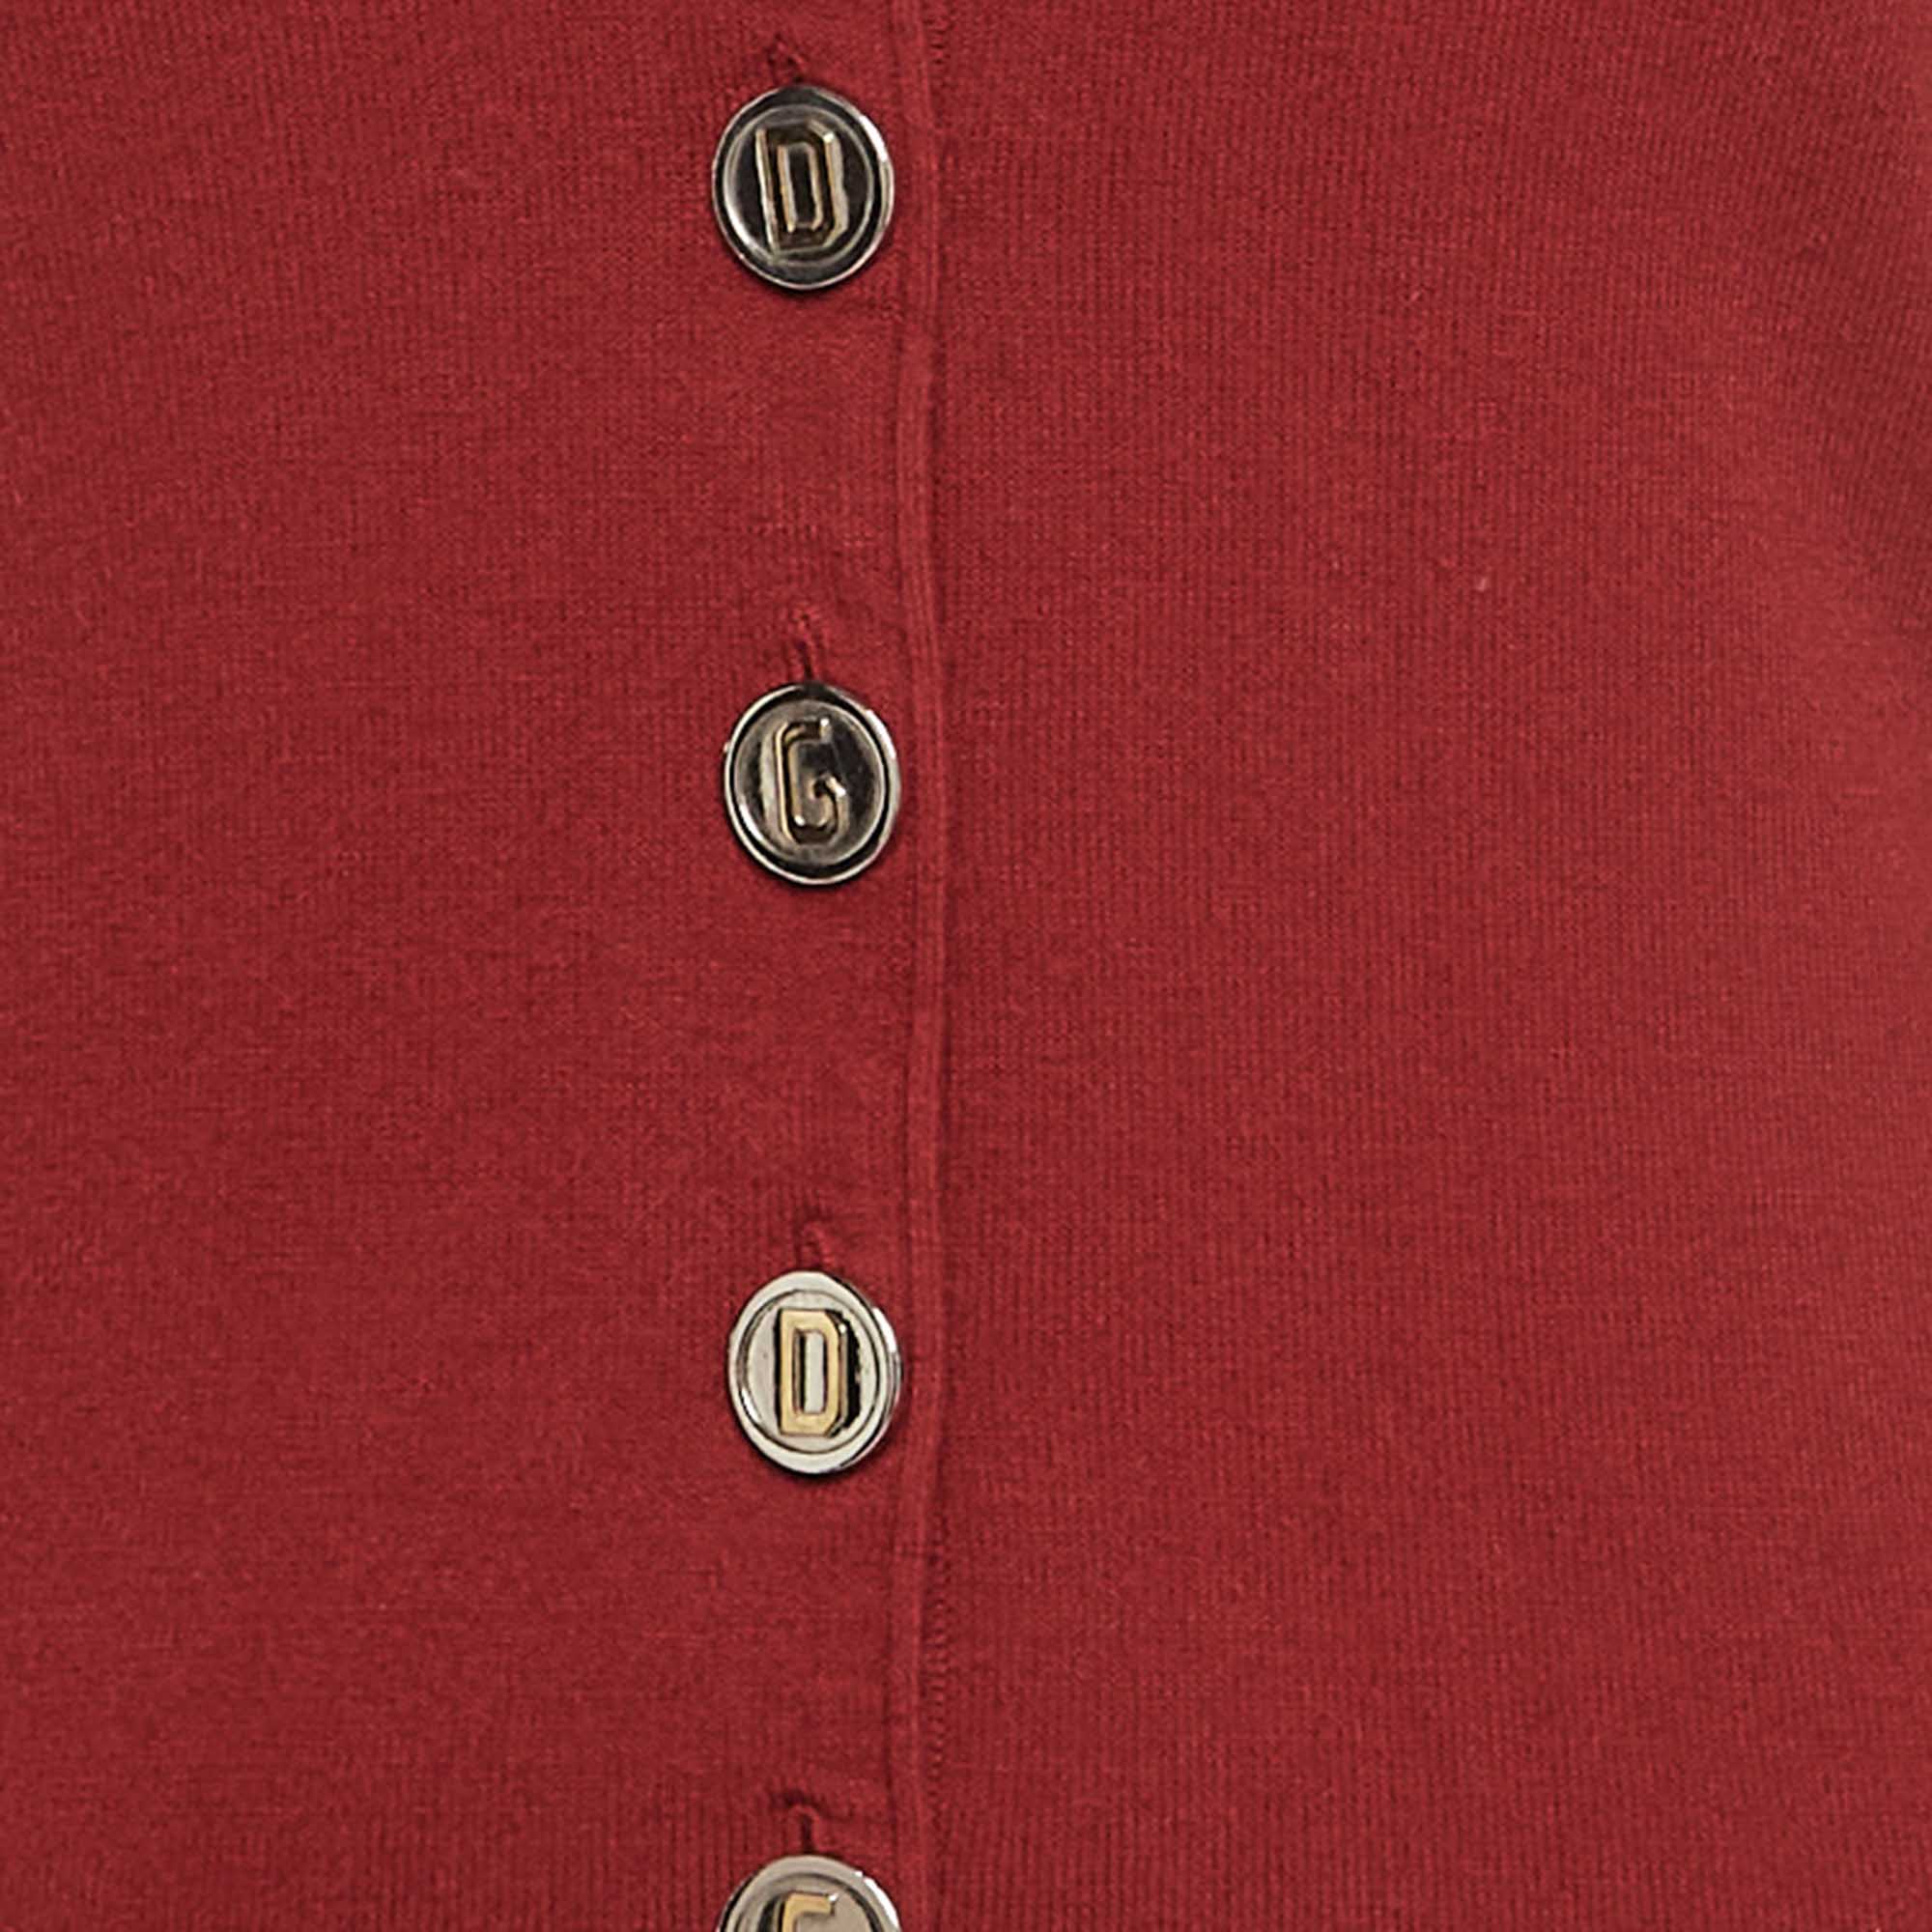 Dolce & Gabbana Red Knit DG Detail Buttoned Cardigan M